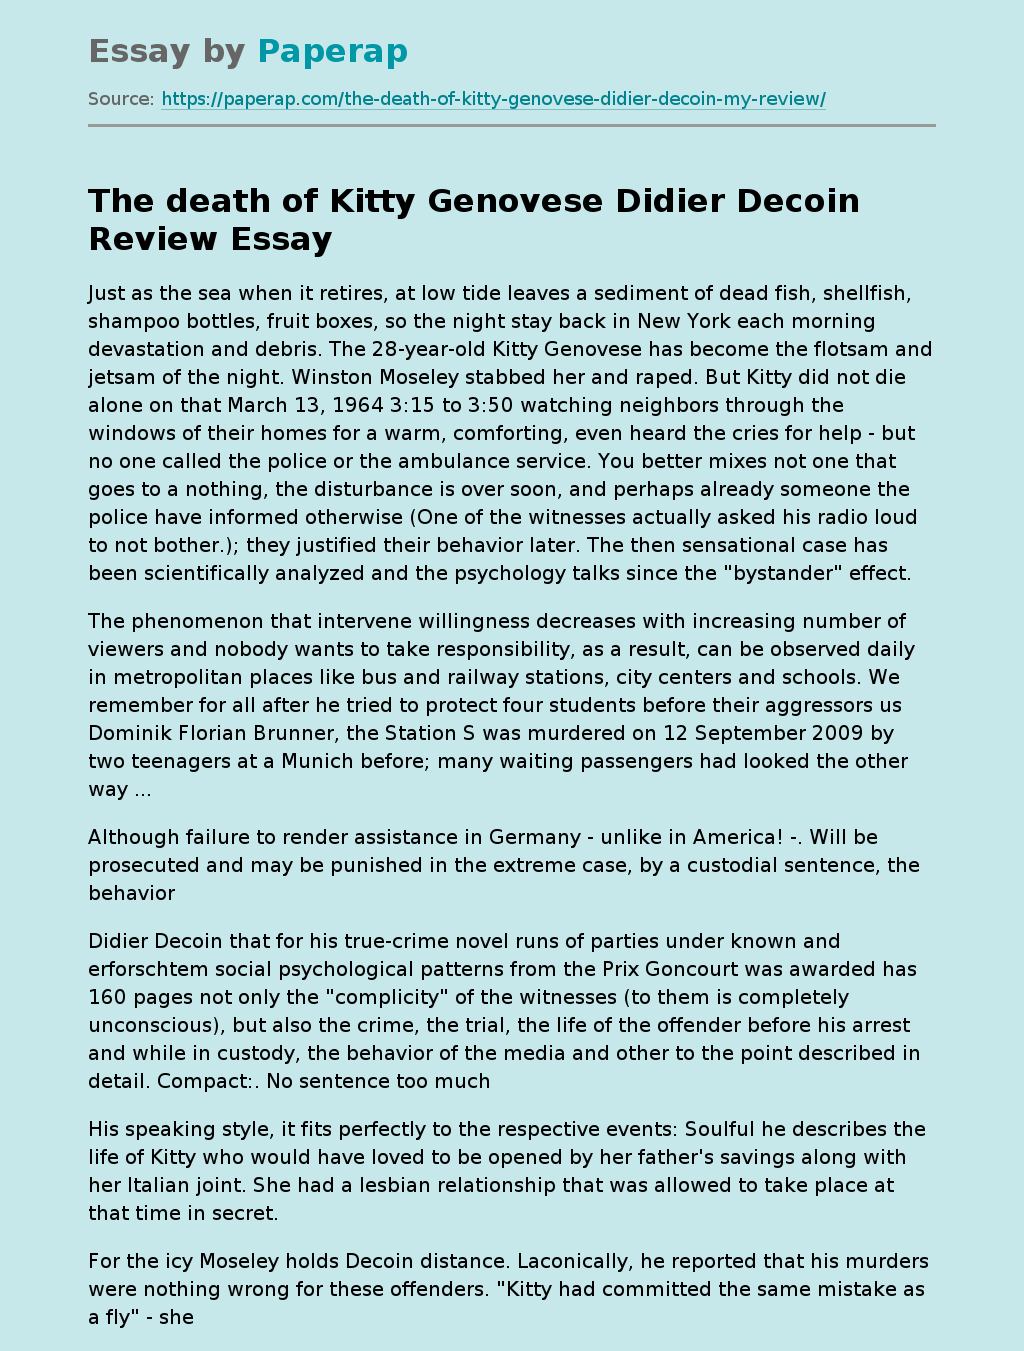 The Death of Kitty Genovese Didier Decoin Review